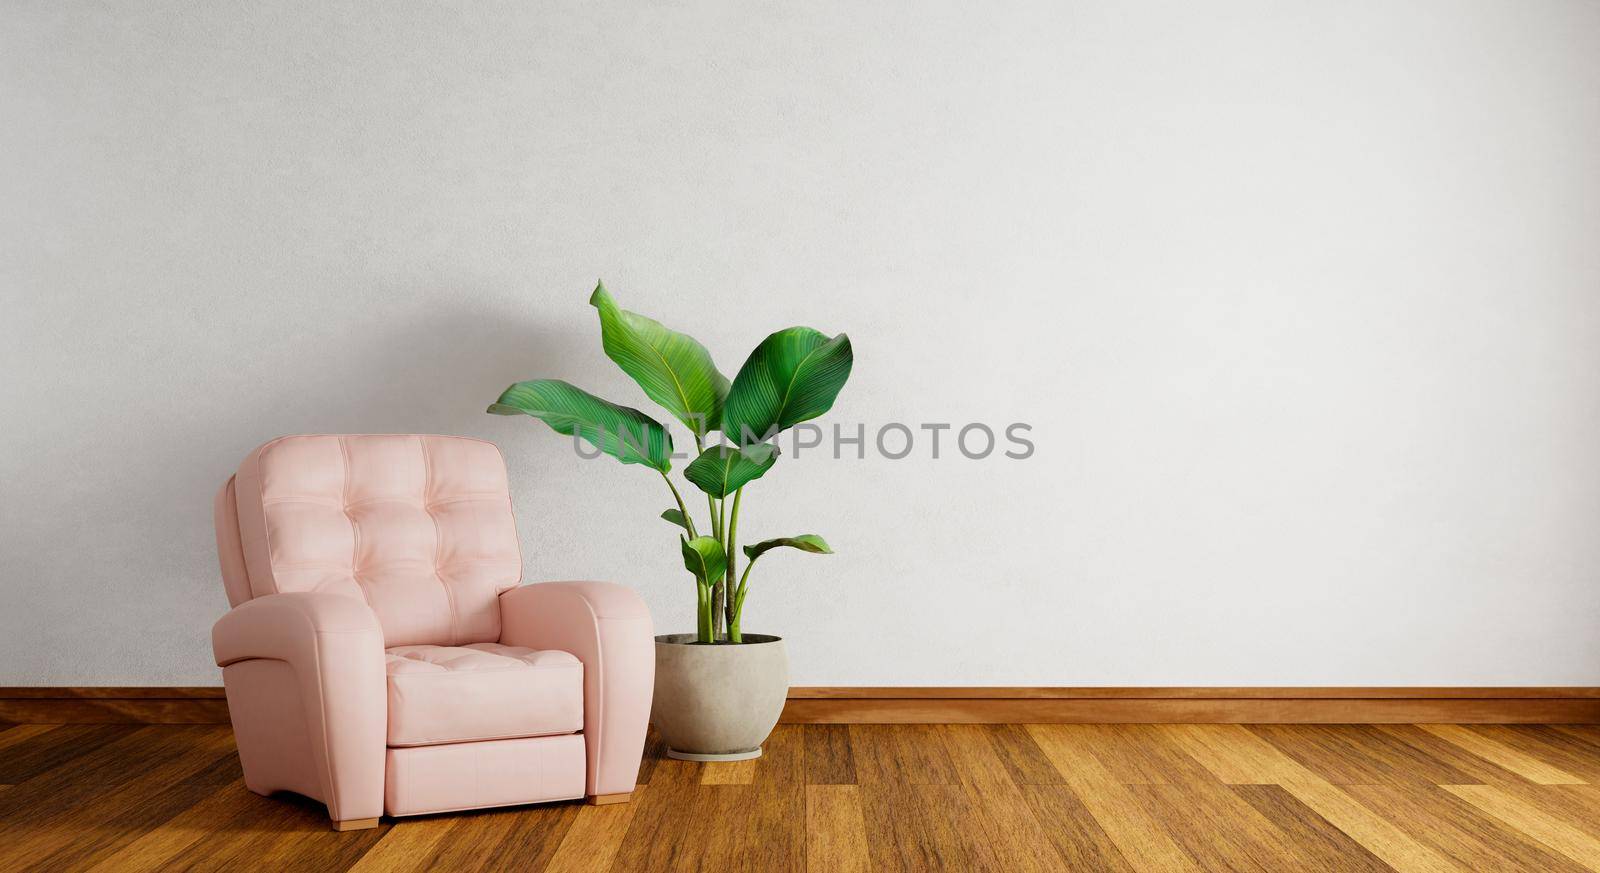 Pink sofa on empty white wall with wooden parquet floor in living room background. Architecture and interior. 3D illustration rendering